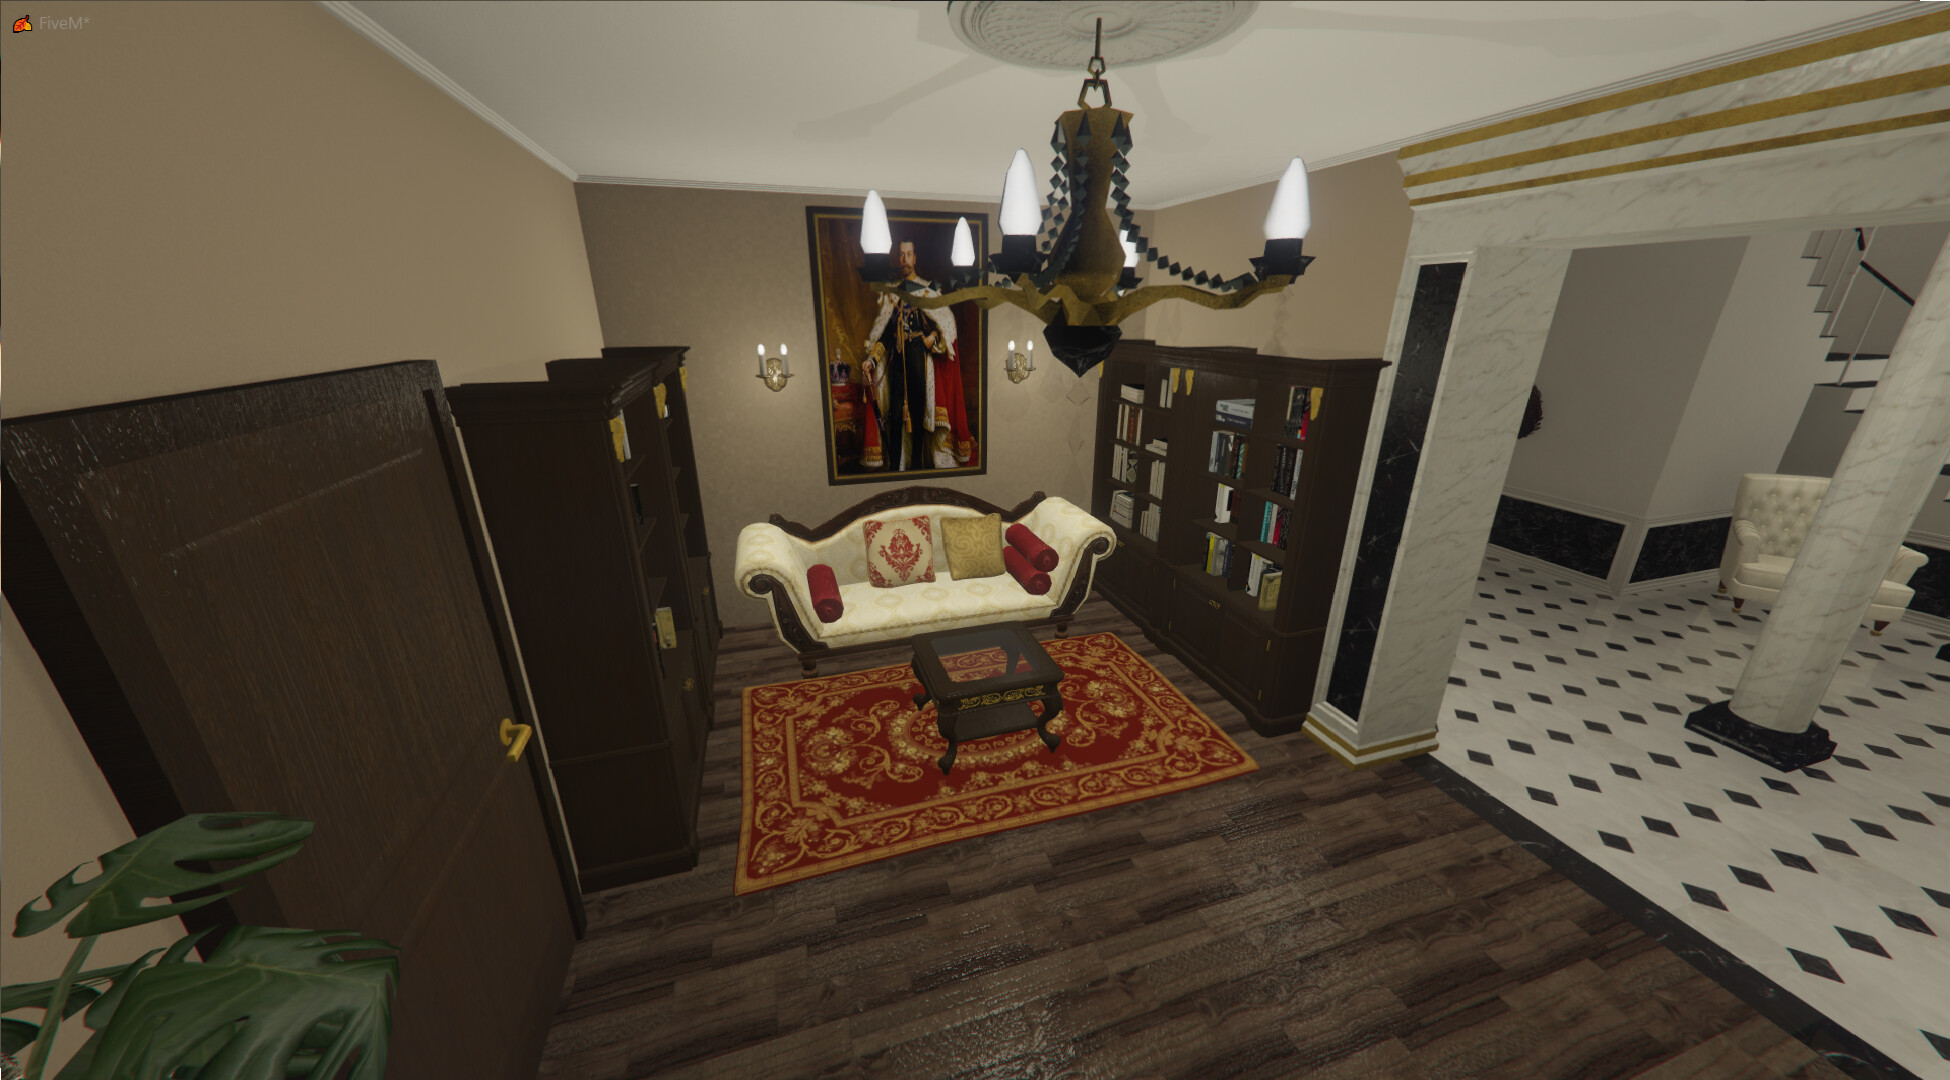 Rockford Hills Rich House Interior [MLO] - Releases - Cfx.re Community